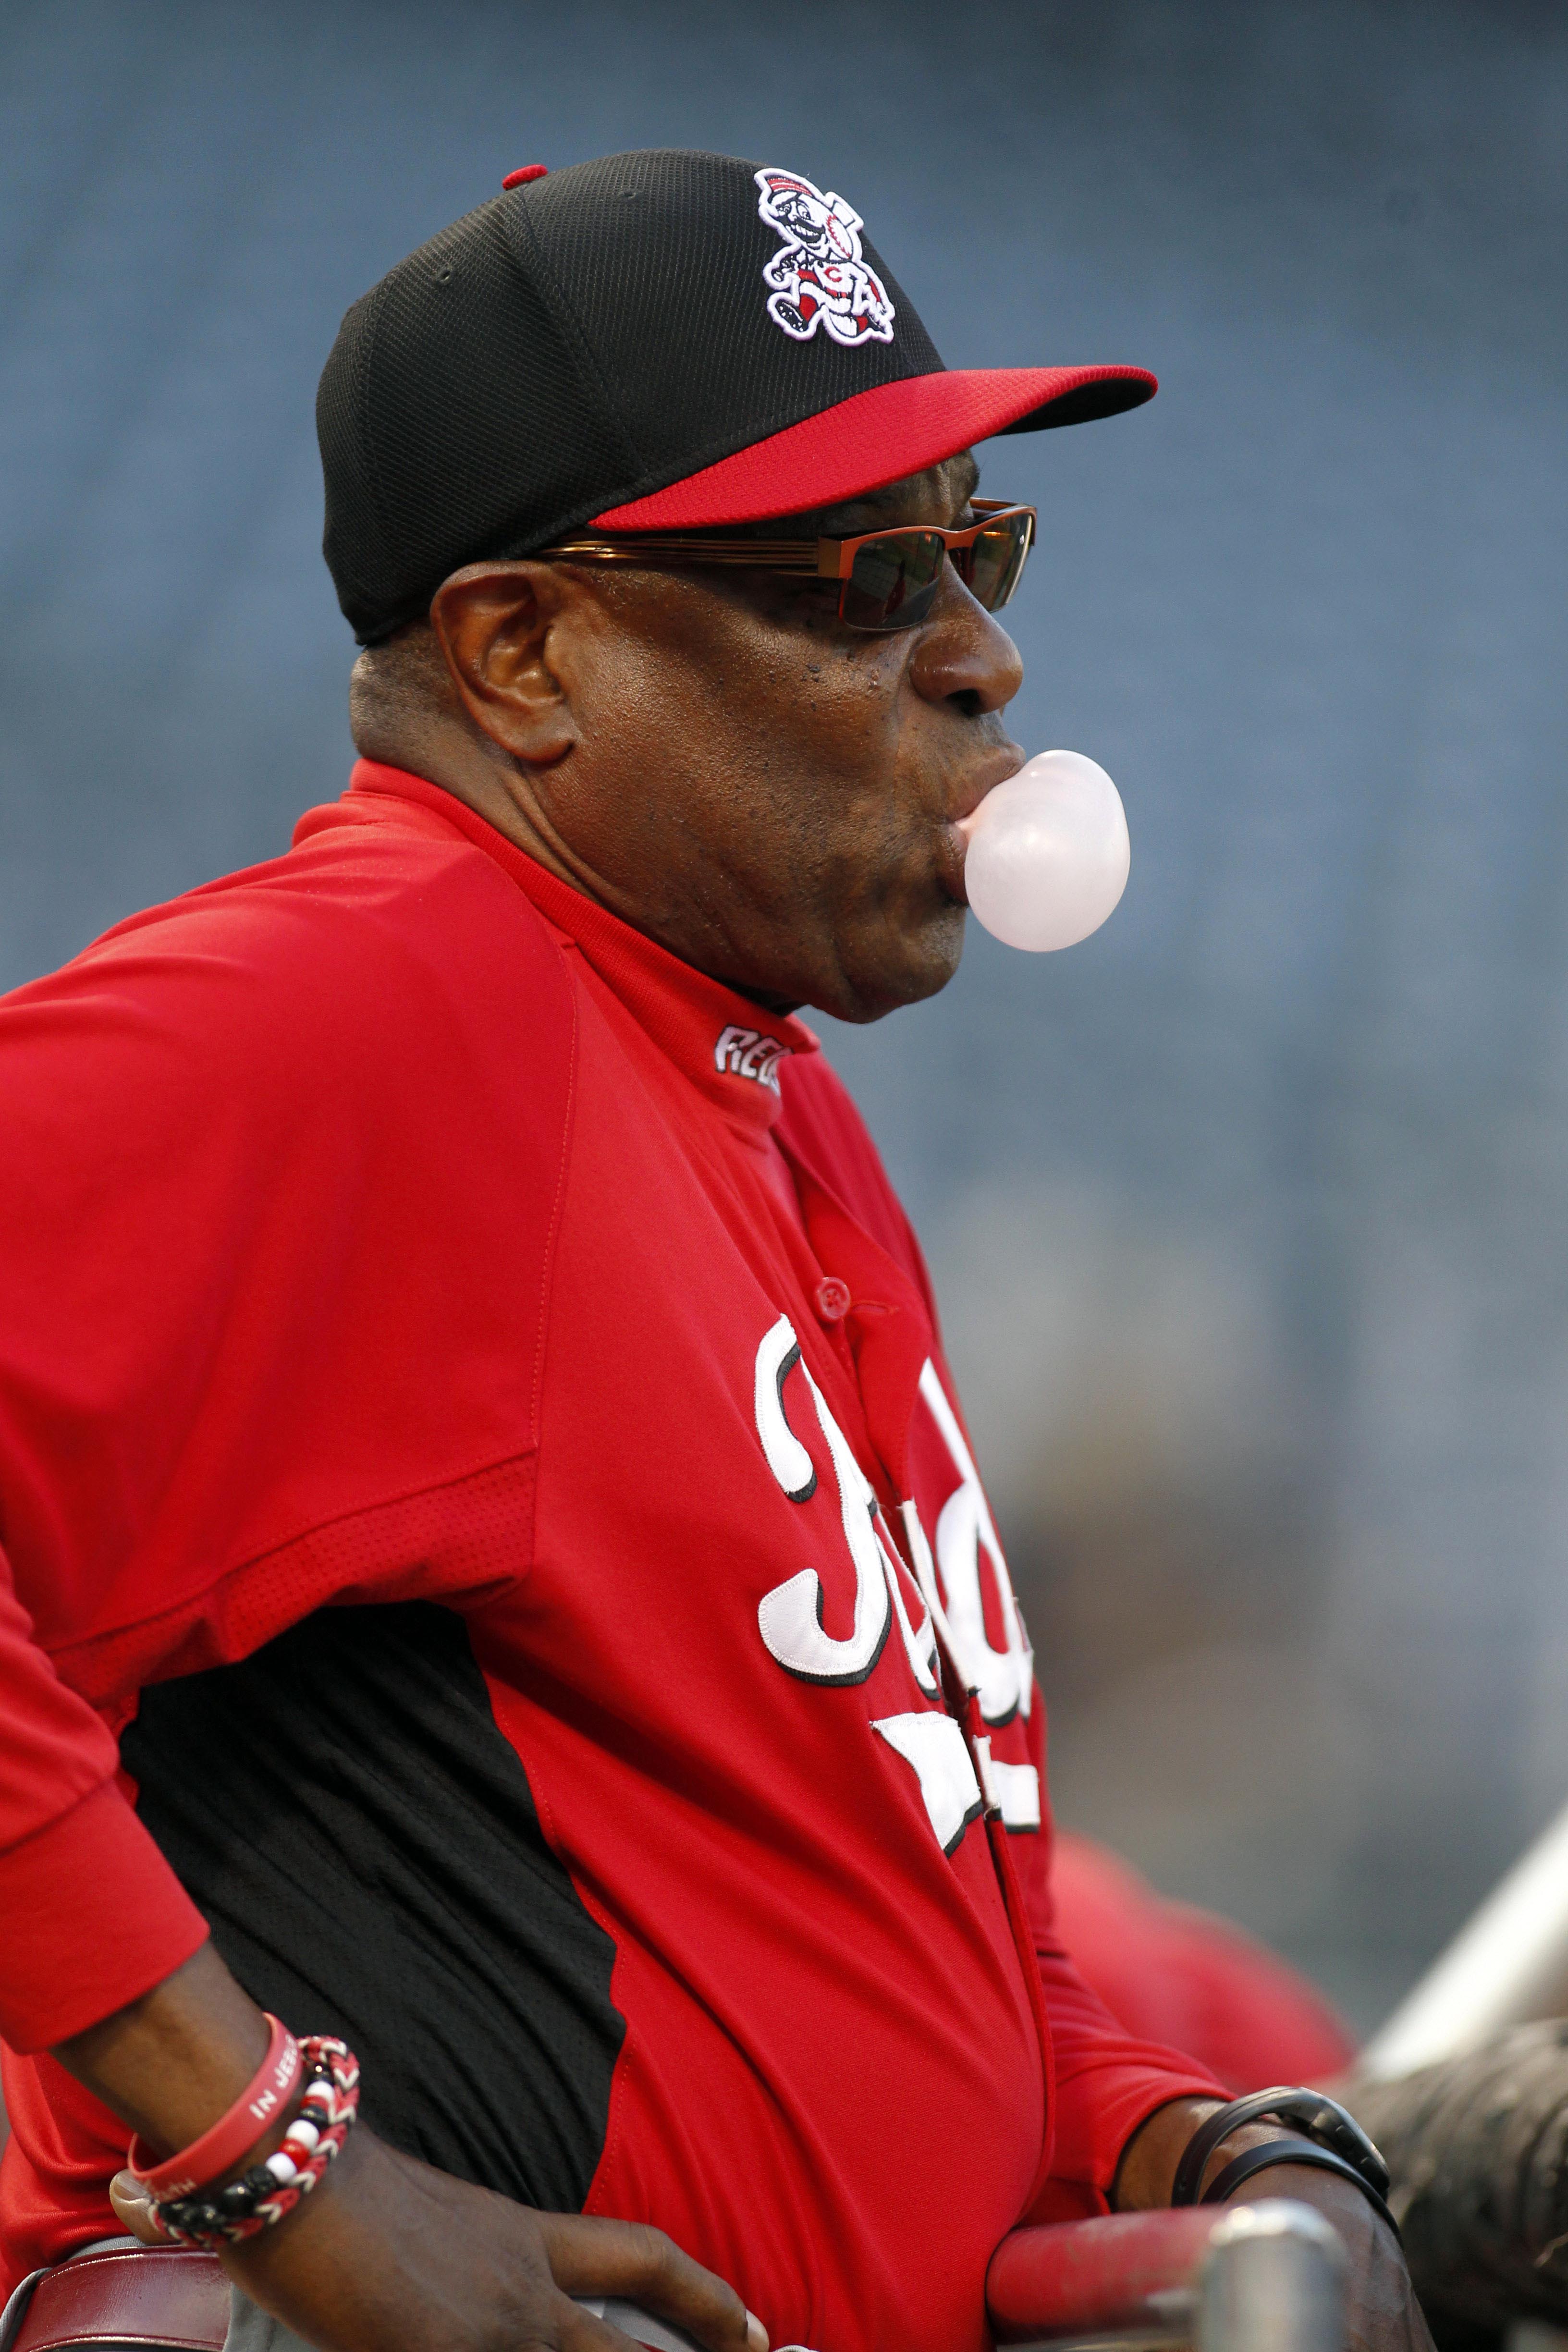 Bruce Bochy, Dusty Baker offer a touch of the old days in